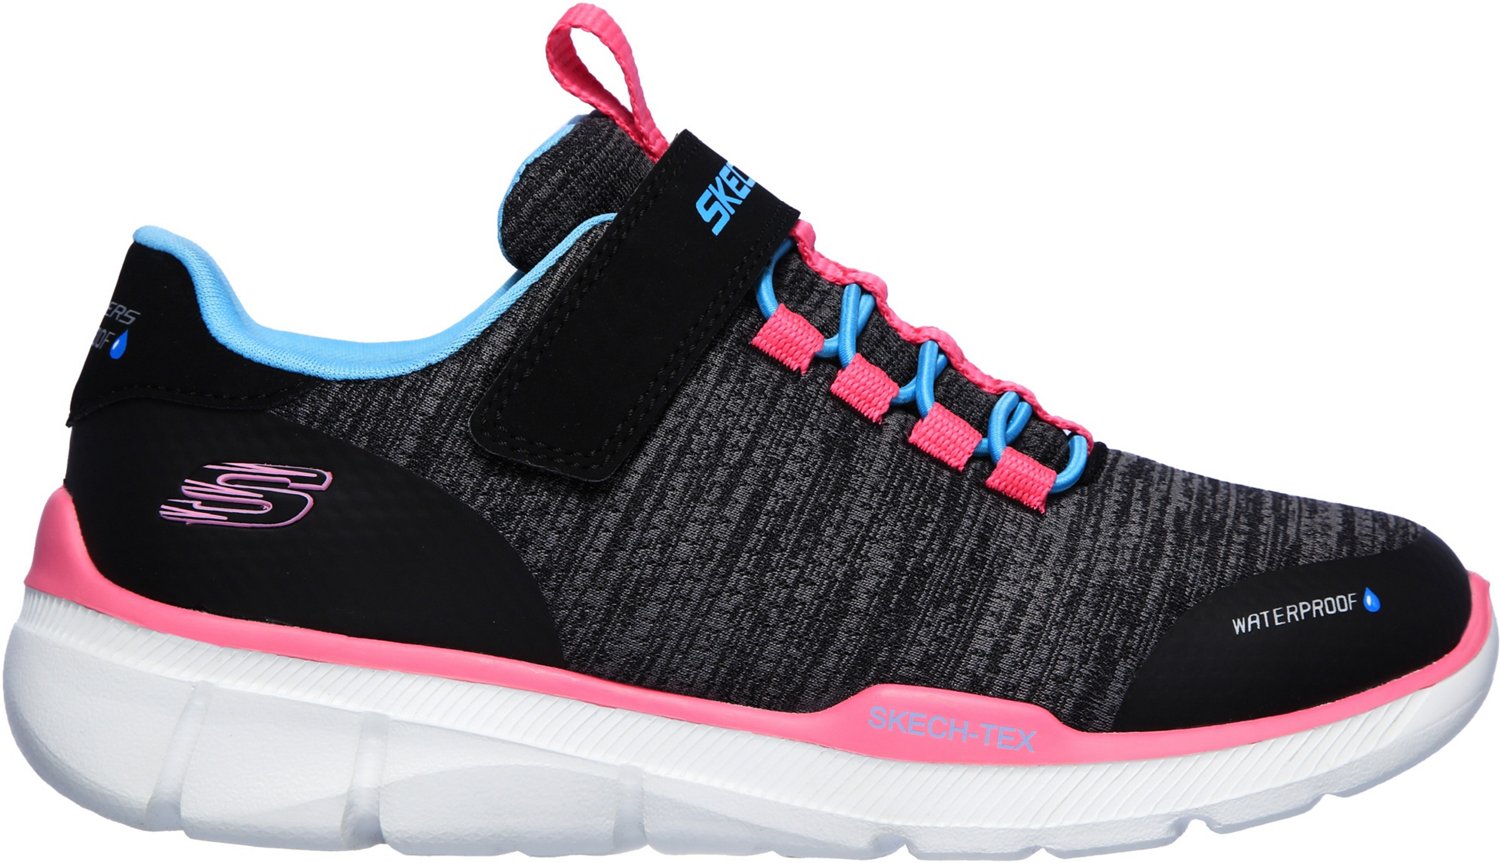 skechers youth shoes